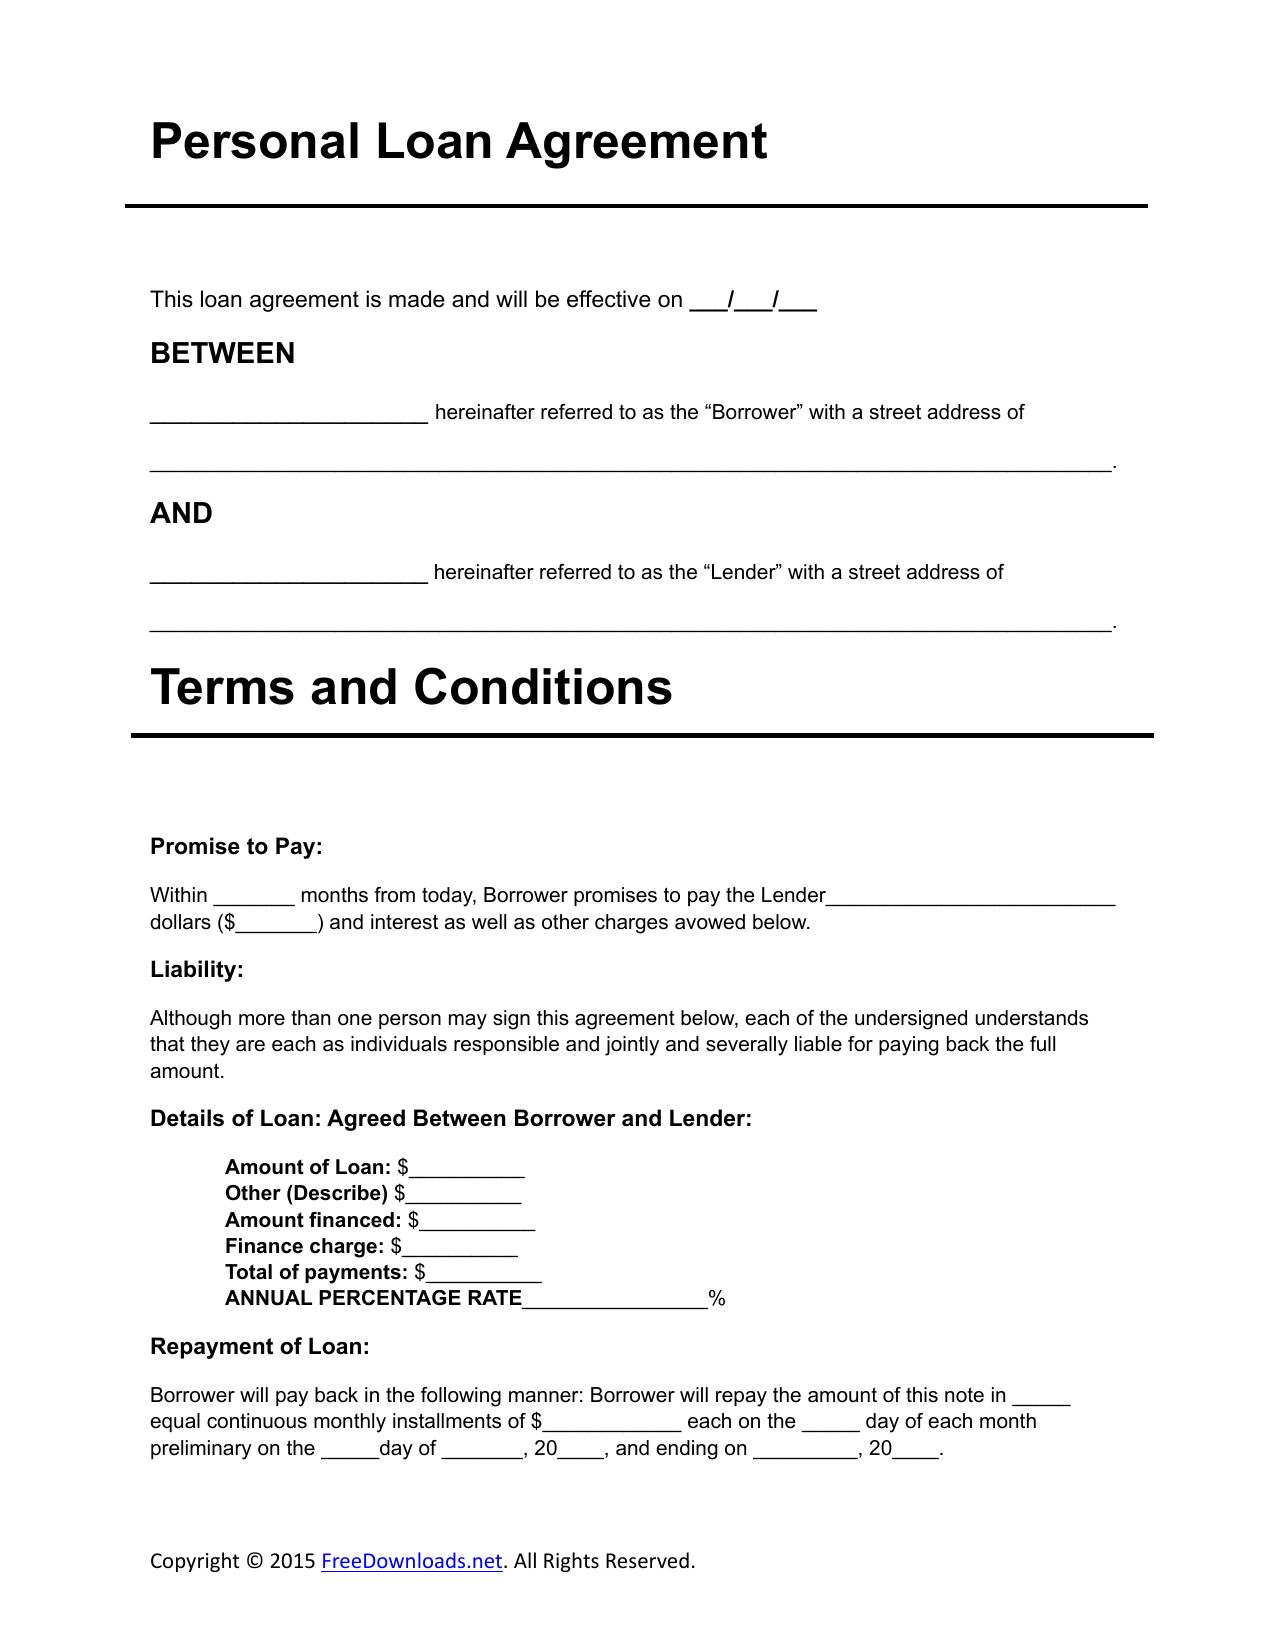 Download Personal Loan Agreement Template  PDF  RTF  Word For Free Promissory Note Template For Personal Loan